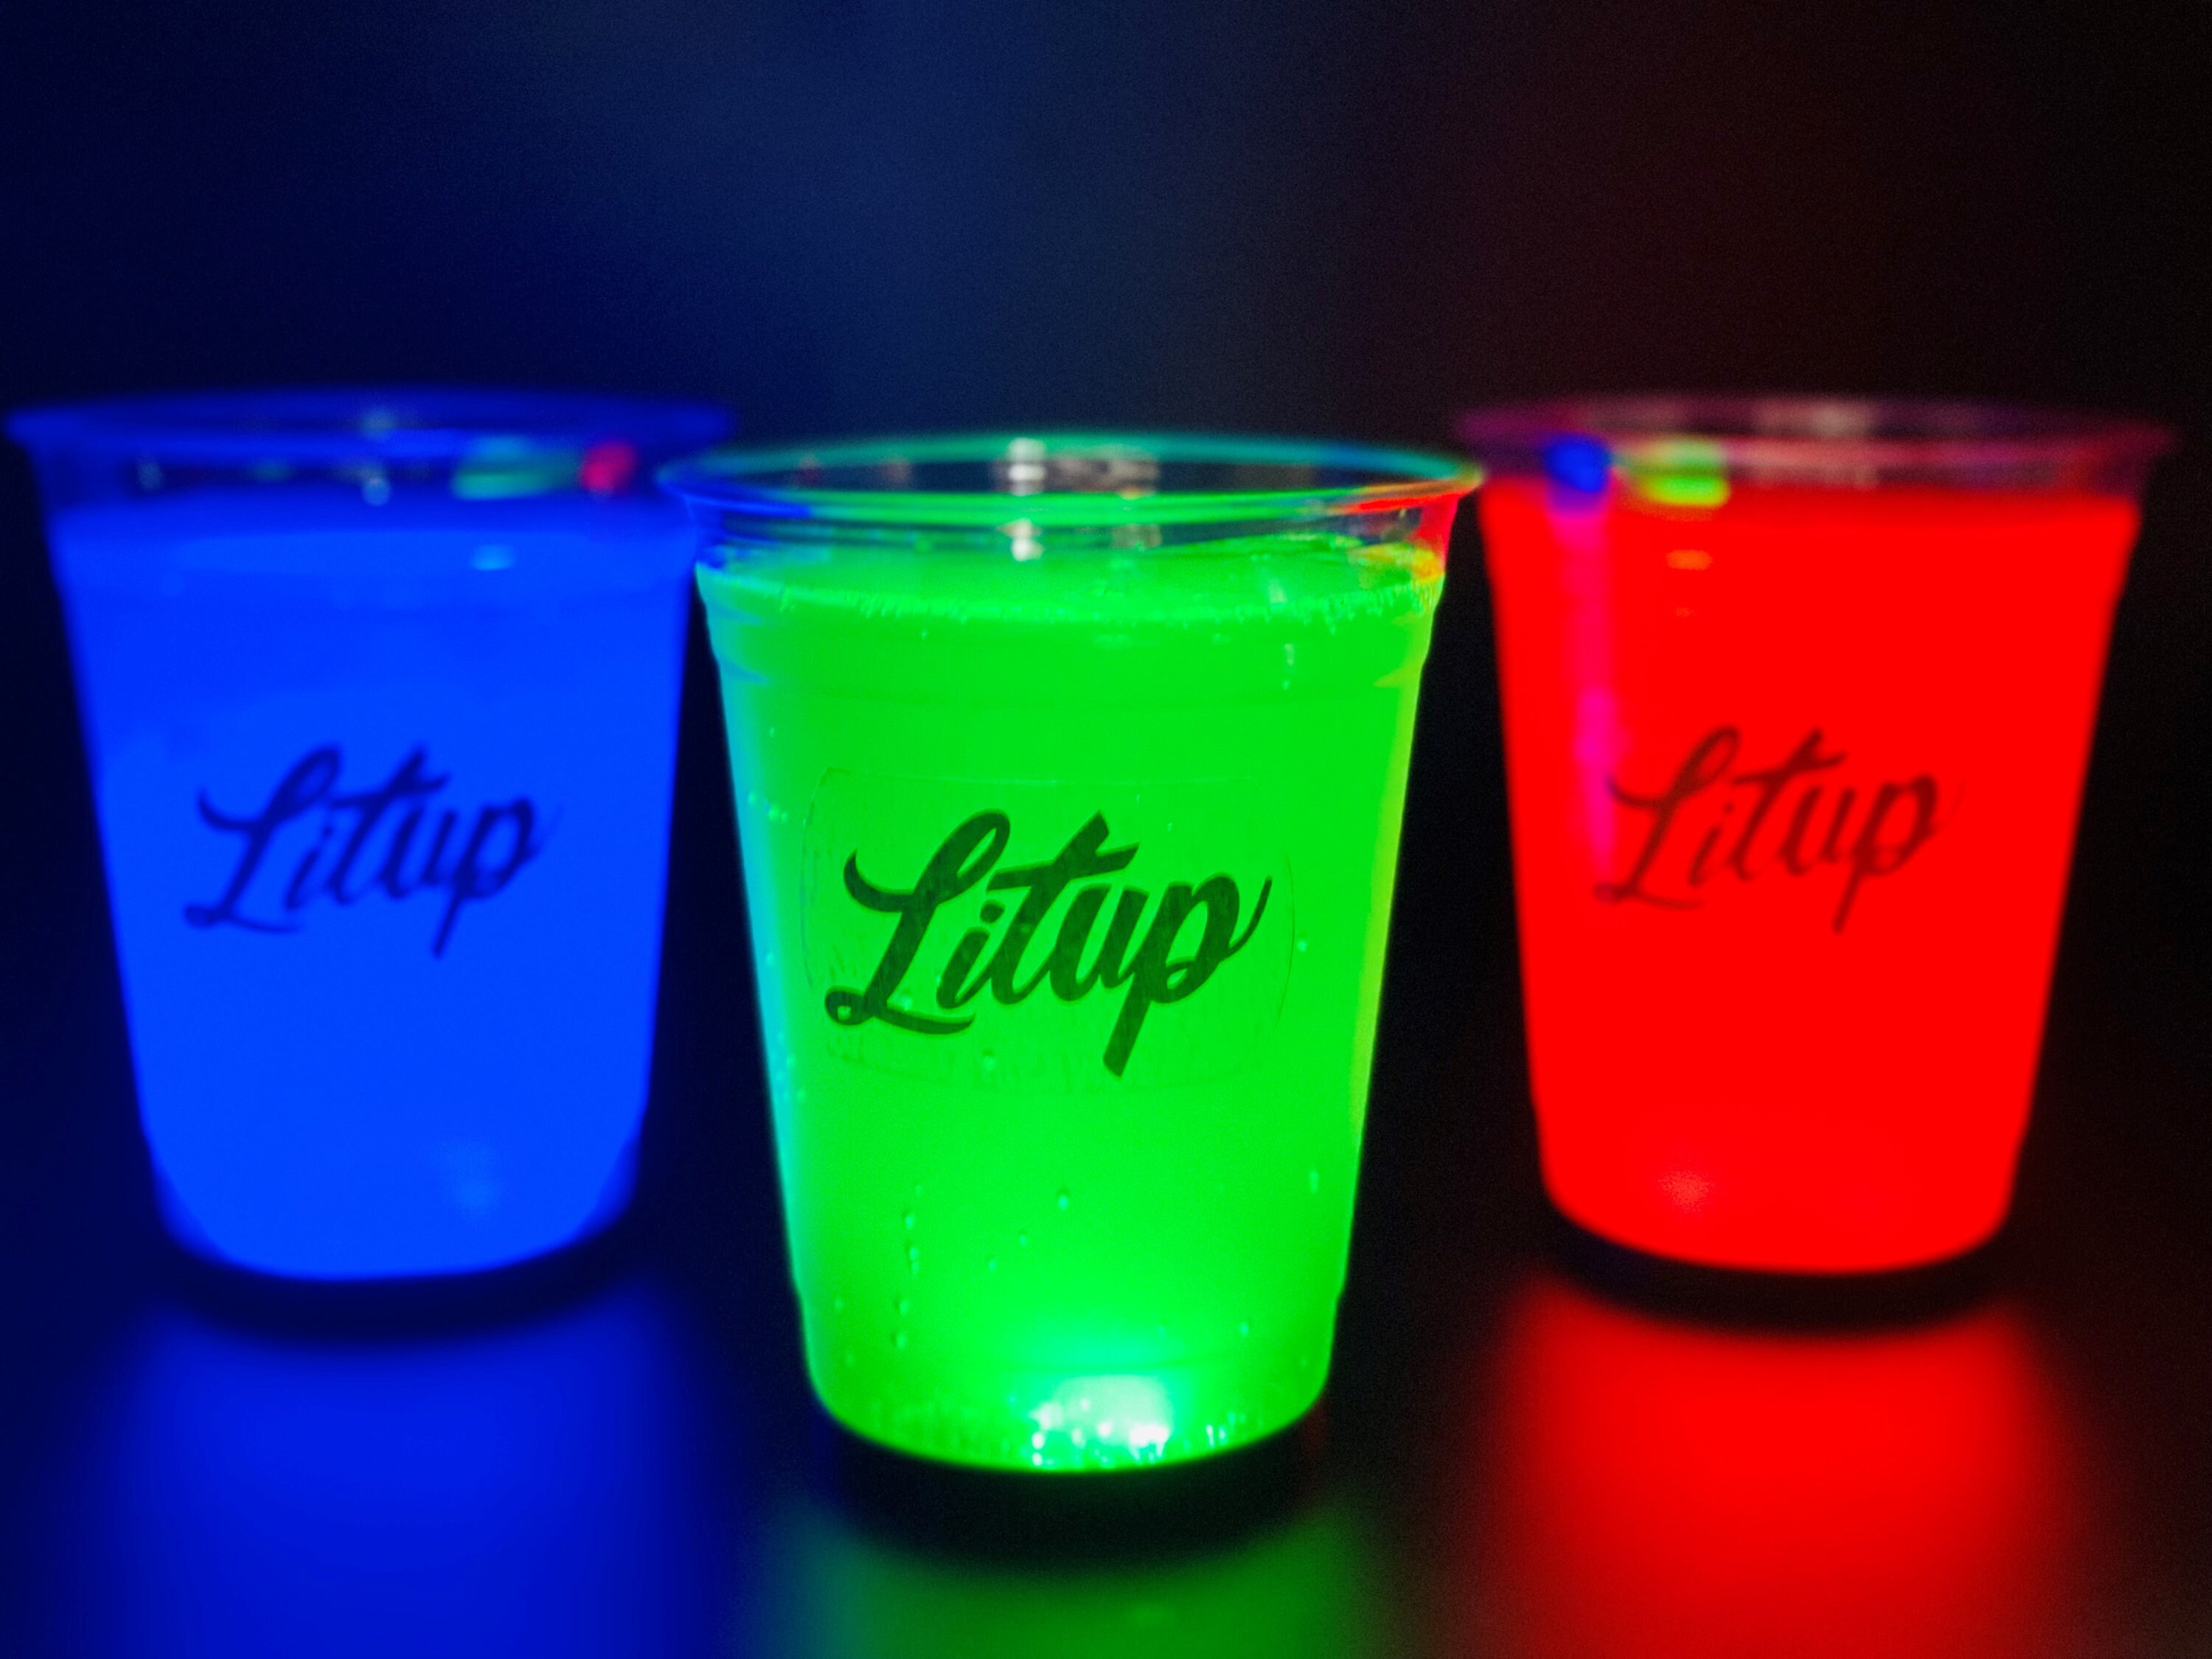 LED Flashing Light Up Glass - Unique Lights Drinking Glass For Halloween  Cocktail, Birthday Squad Cups, Fun Drinking Accessories, Novelty LED Light  Up